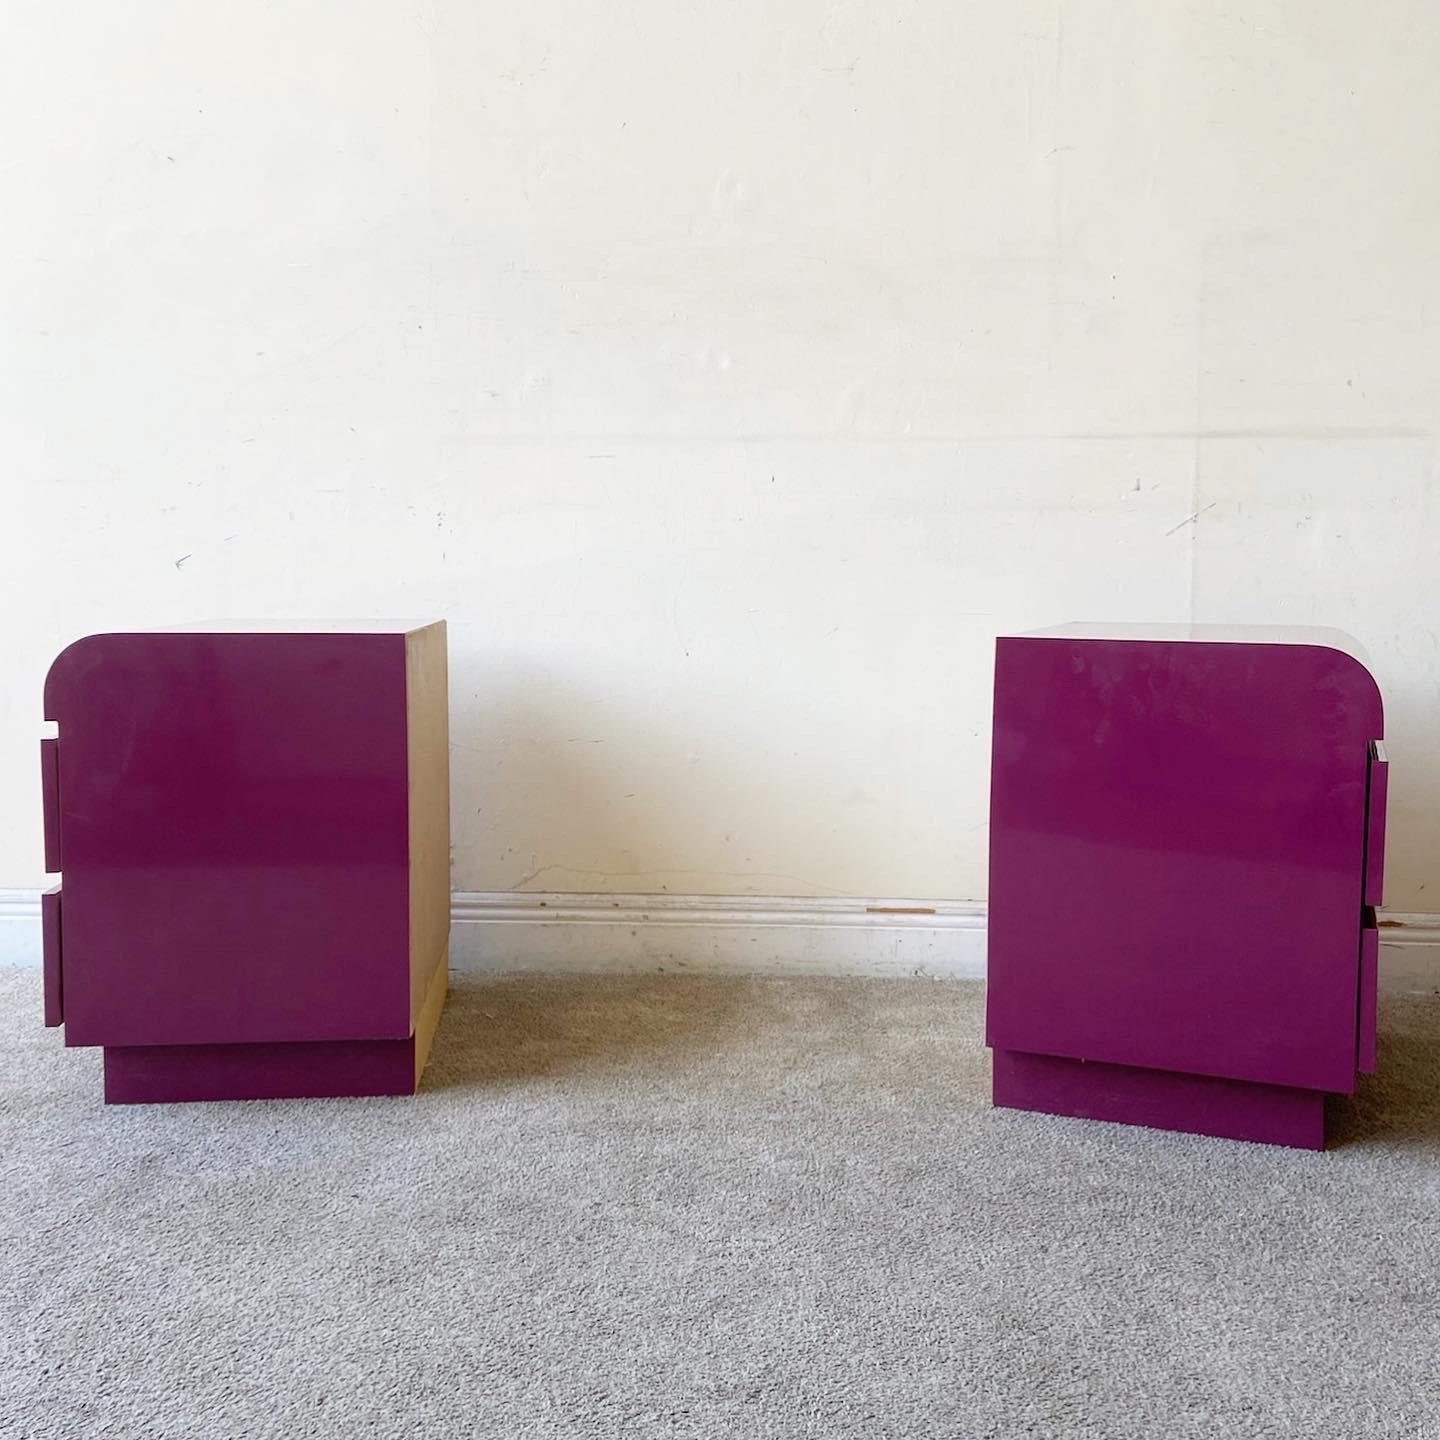 American 1980s Postmodern Purple Lacquer Laminate Nightstands, a Pair